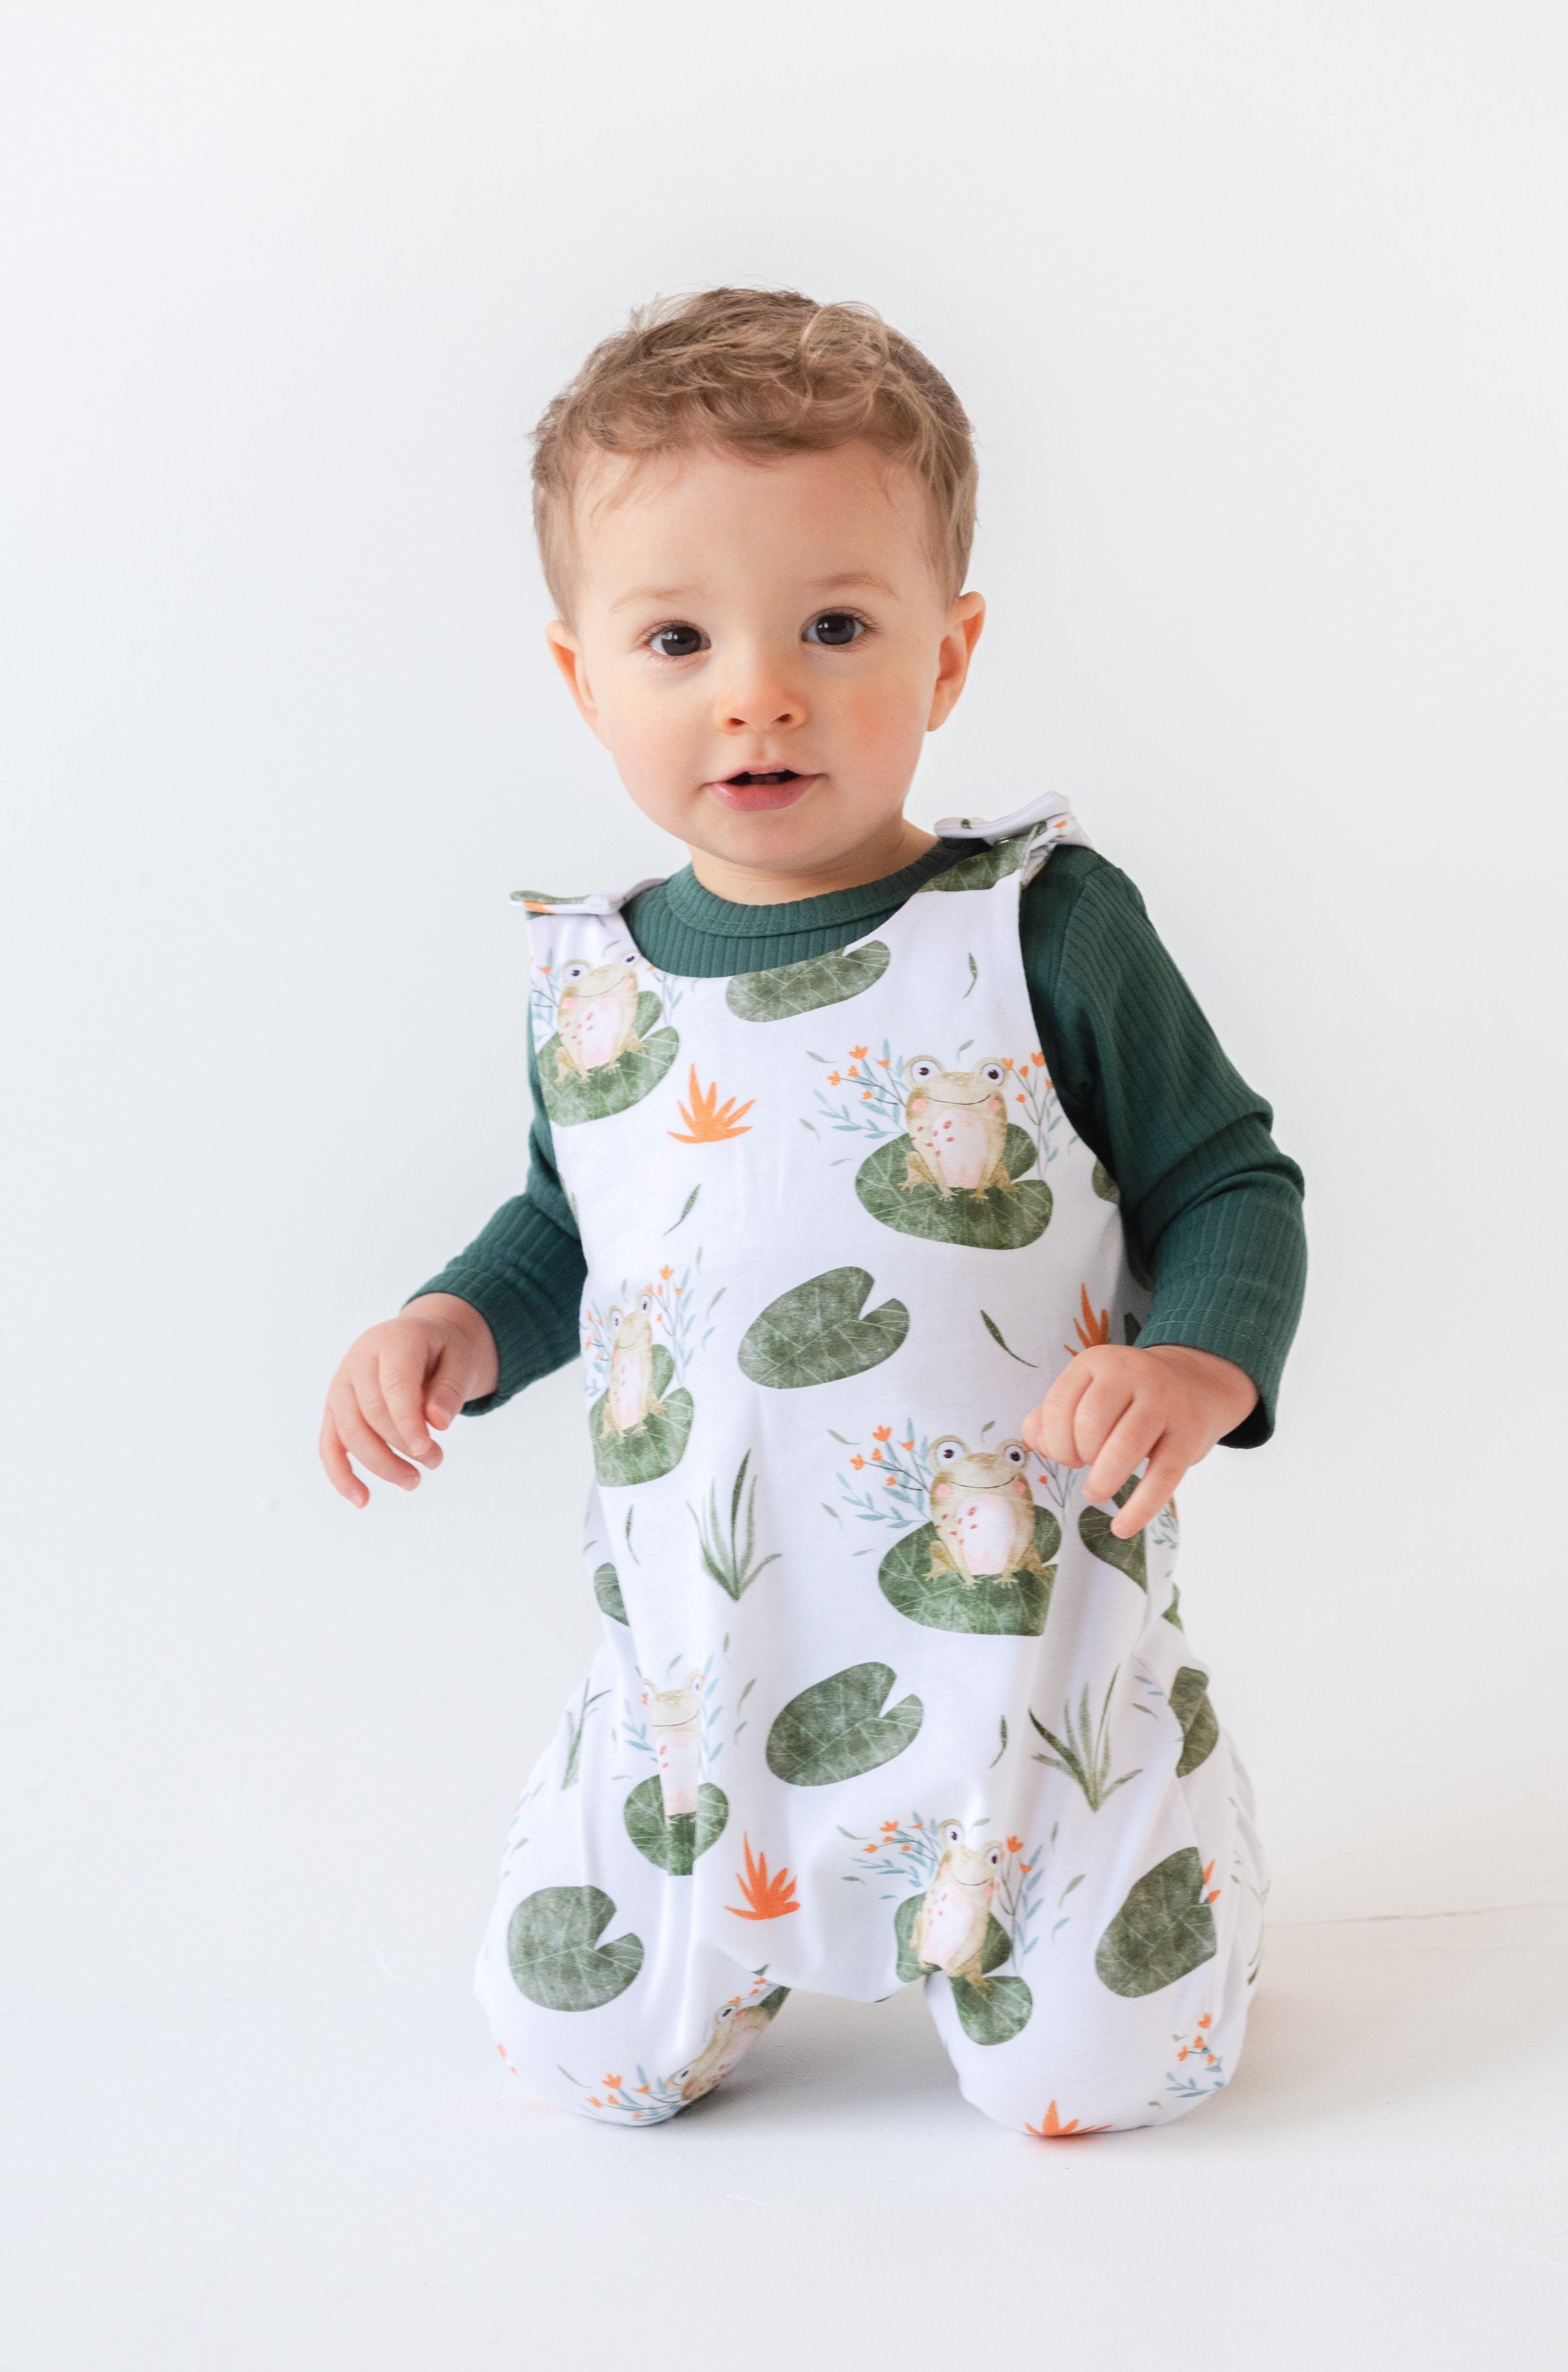 files/lily-pad-frog-dungaree-romper-claybearofficial-4.jpg